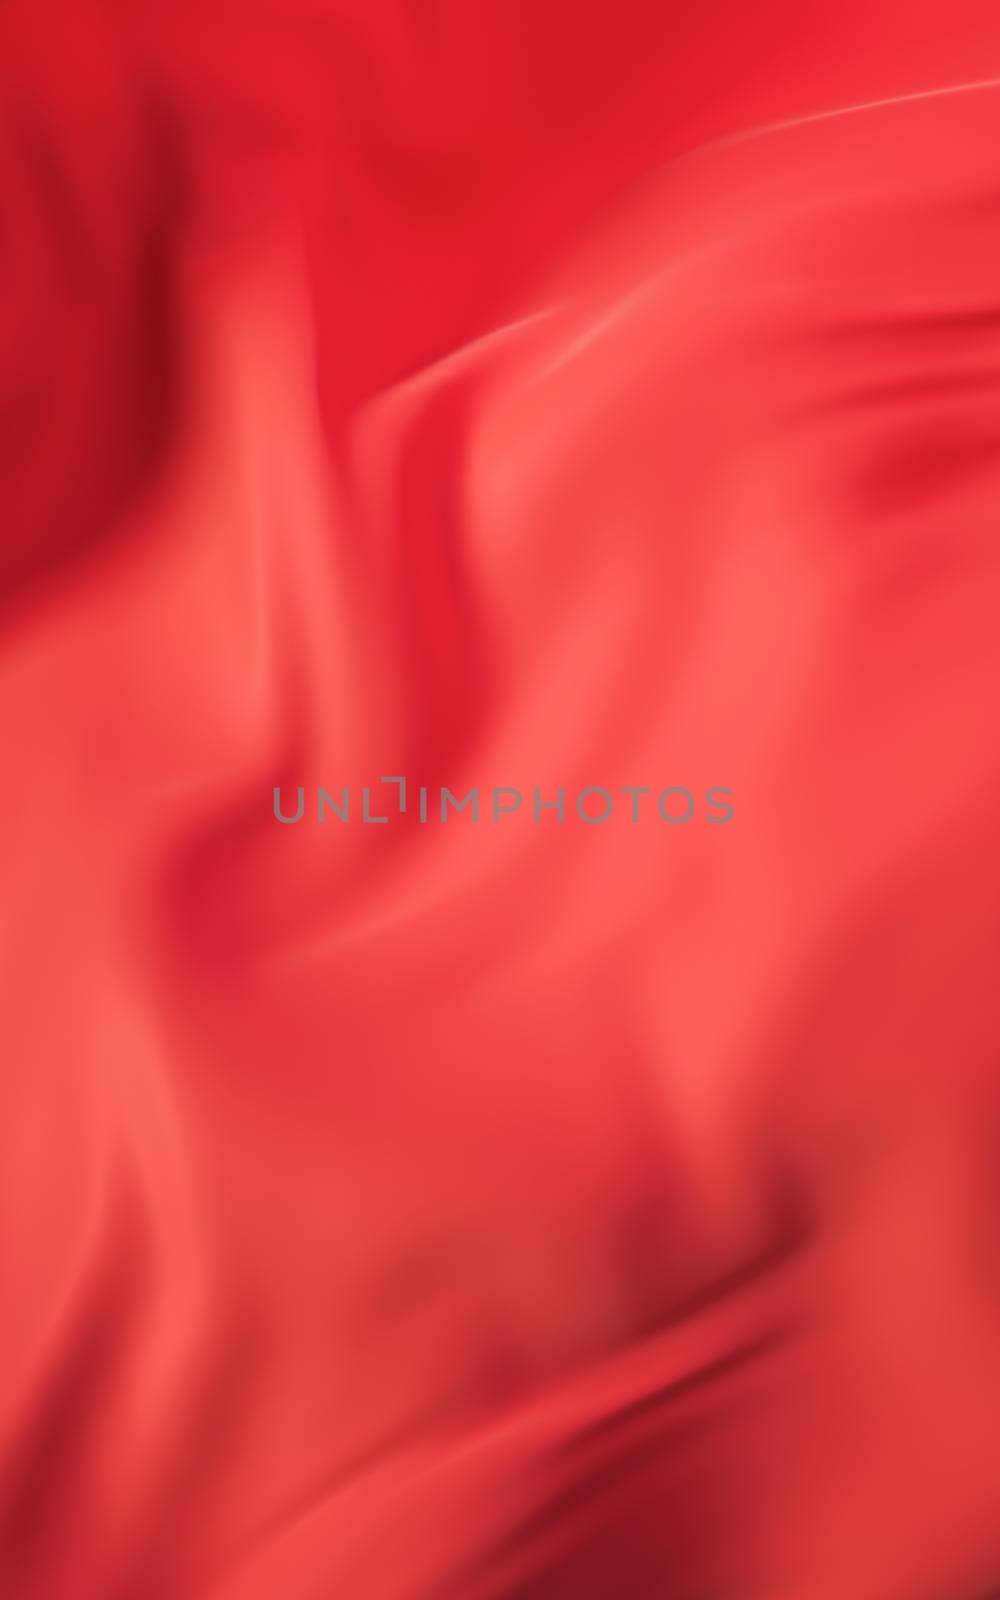 Flowing red cloth background, 3d rendering. by vinkfan